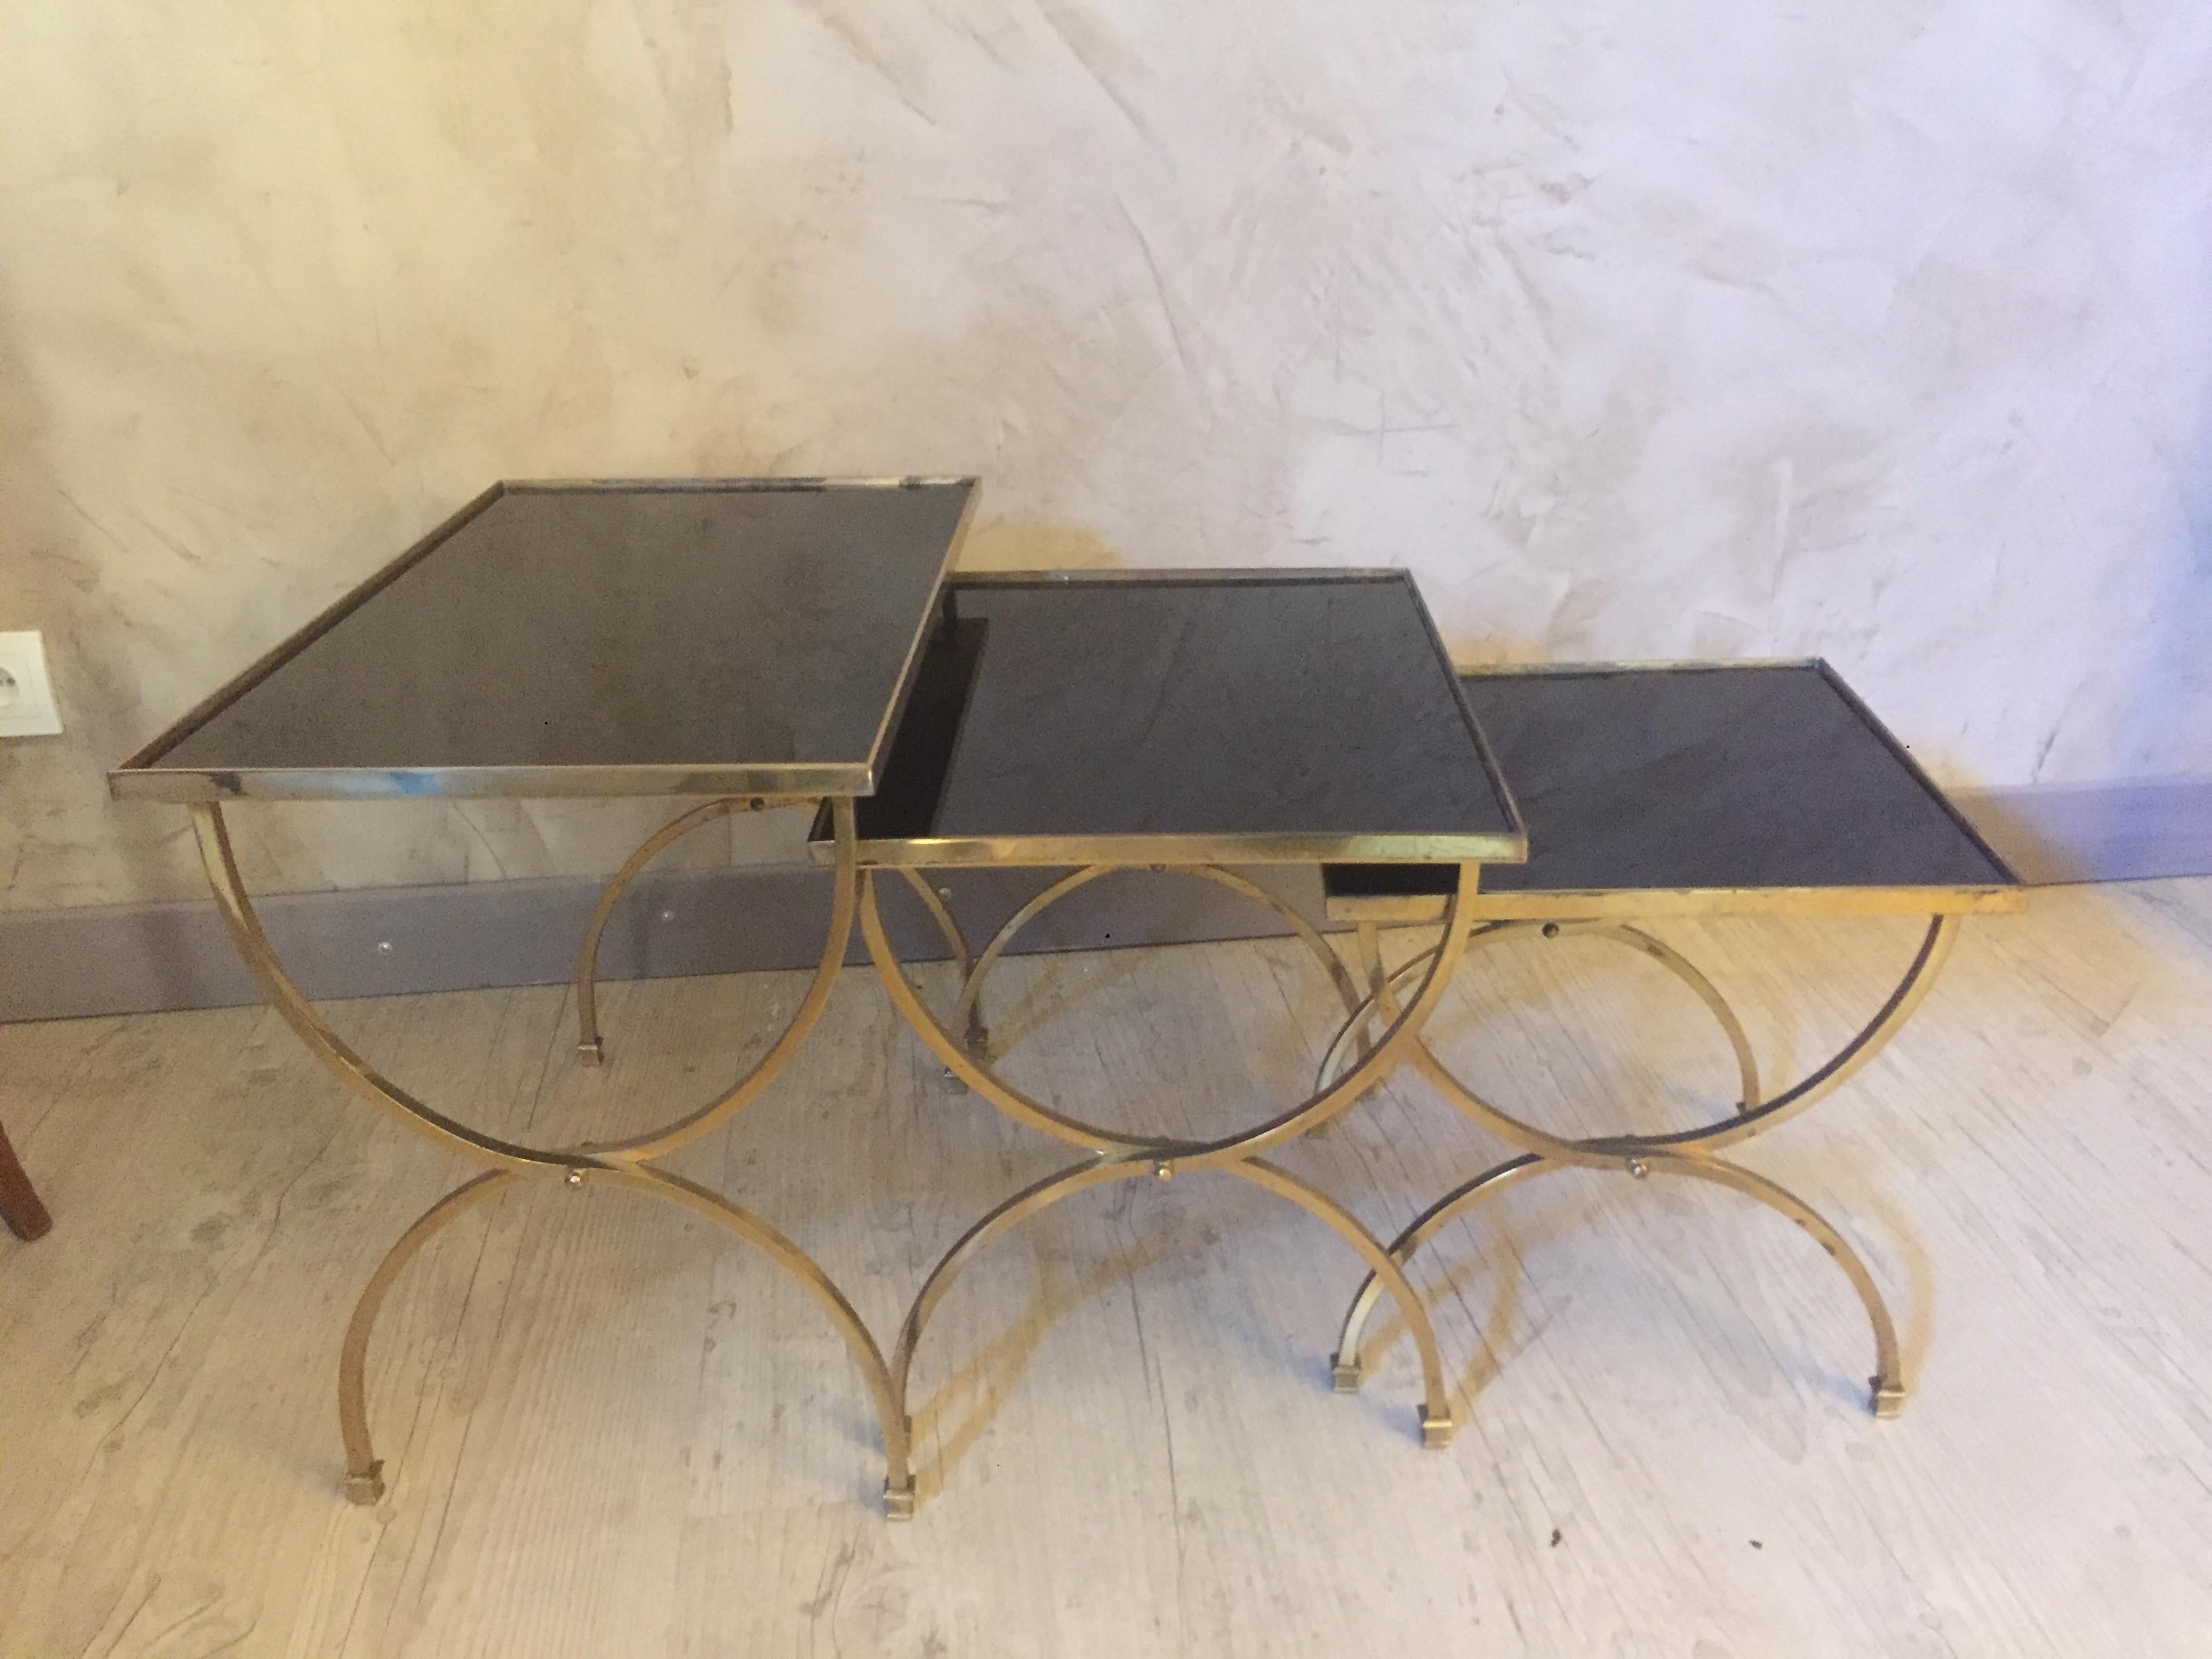 Beautiful 20th century French gilted brass nesting table from the 1950s.
Black glass removable. Nice rounded base.